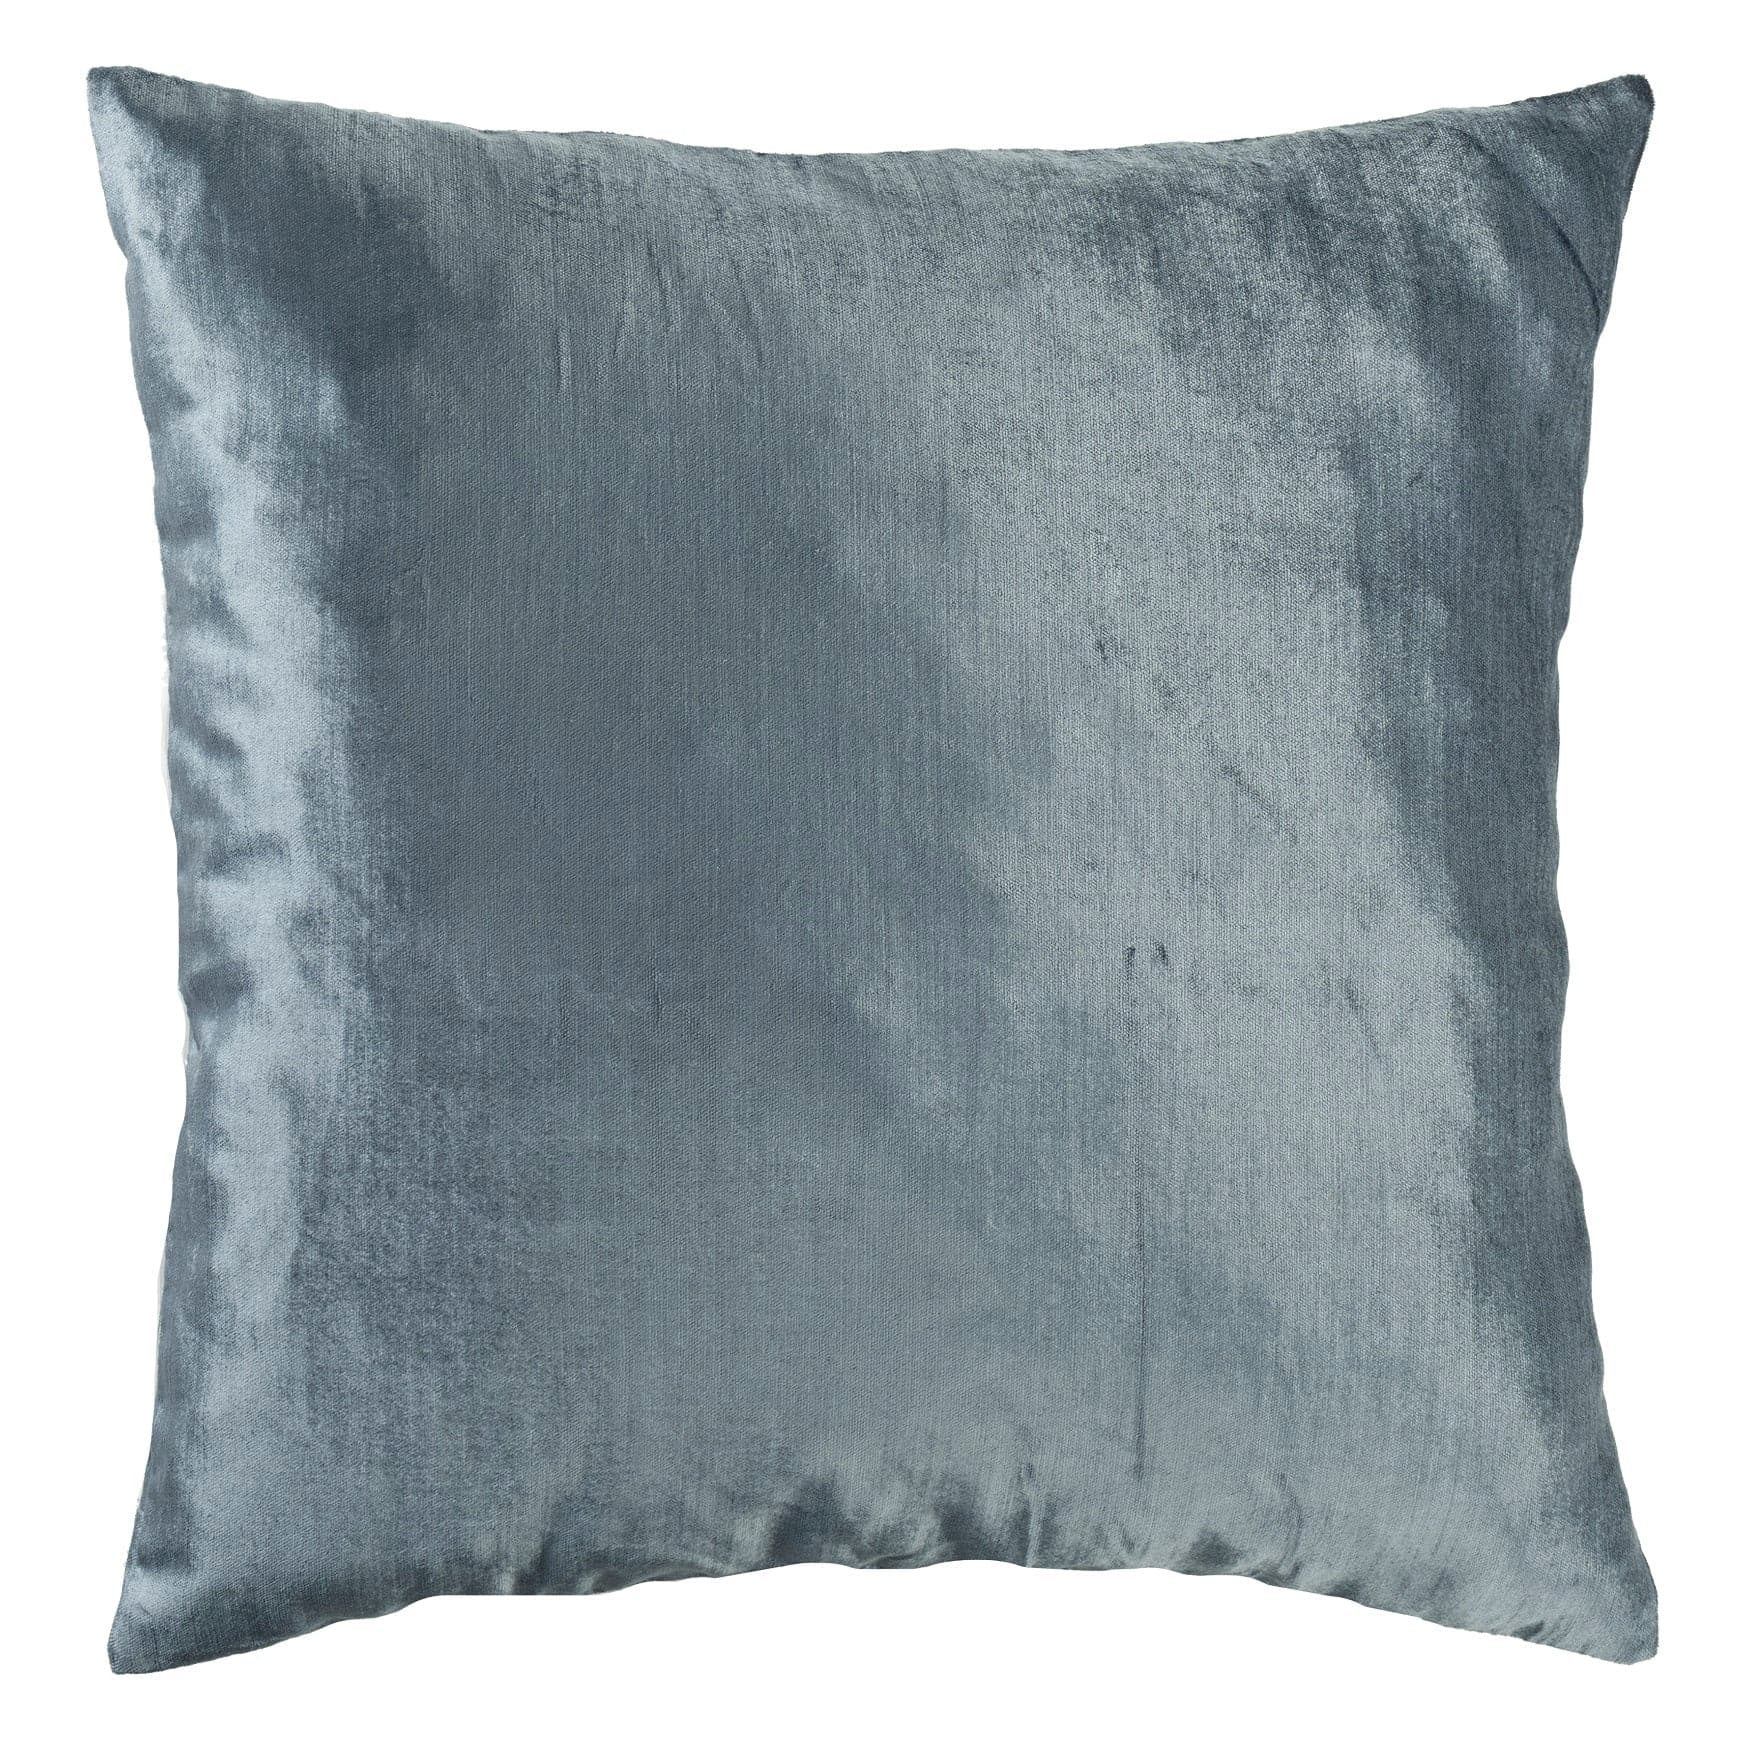 Image of Gracie Gillmore Solid Decorative Pillow